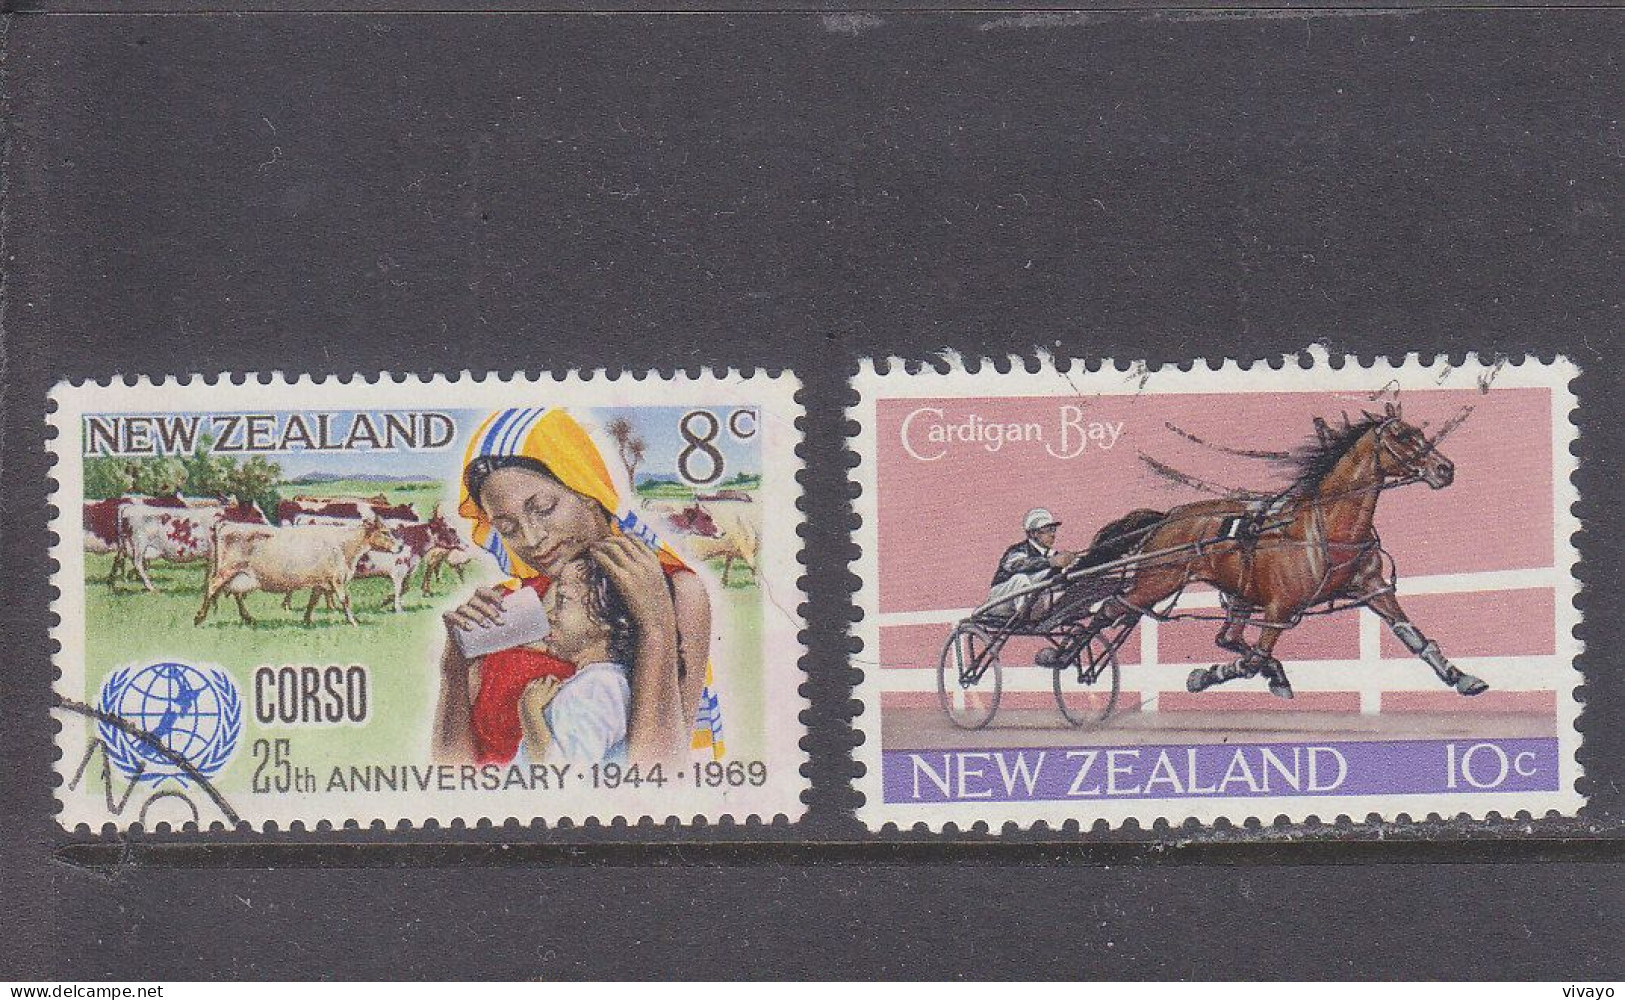 NEW ZEALAND - O / FINE CANCELLED - 1969/1970 - CORSO , CARDIGAN BAY , RACING - Yv. 498, 500 - Mi. 515, 516 - Used Stamps